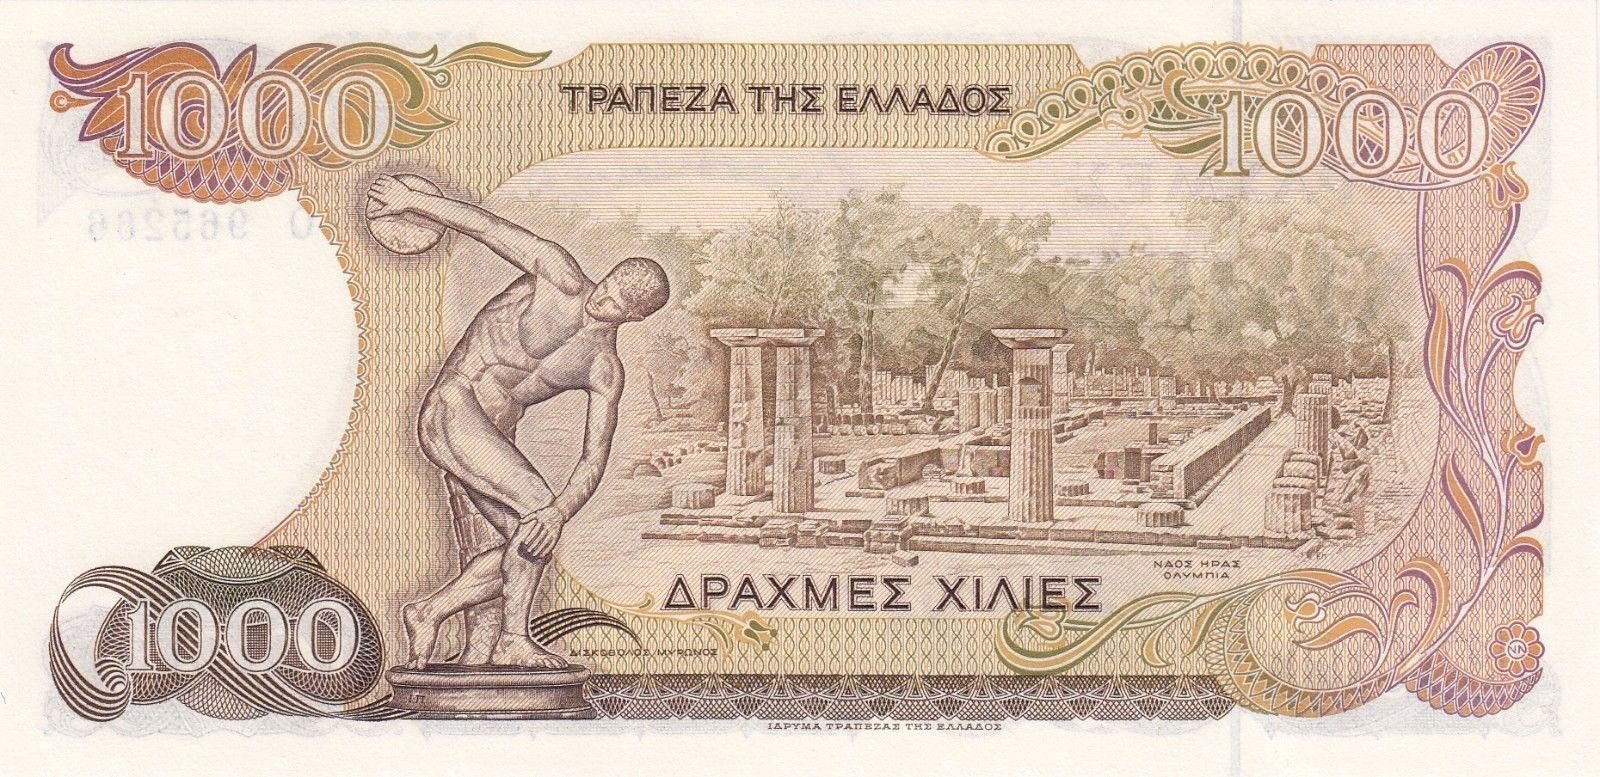 my-currency-collection-greece-currency-1000-greek-drachmas-banknote